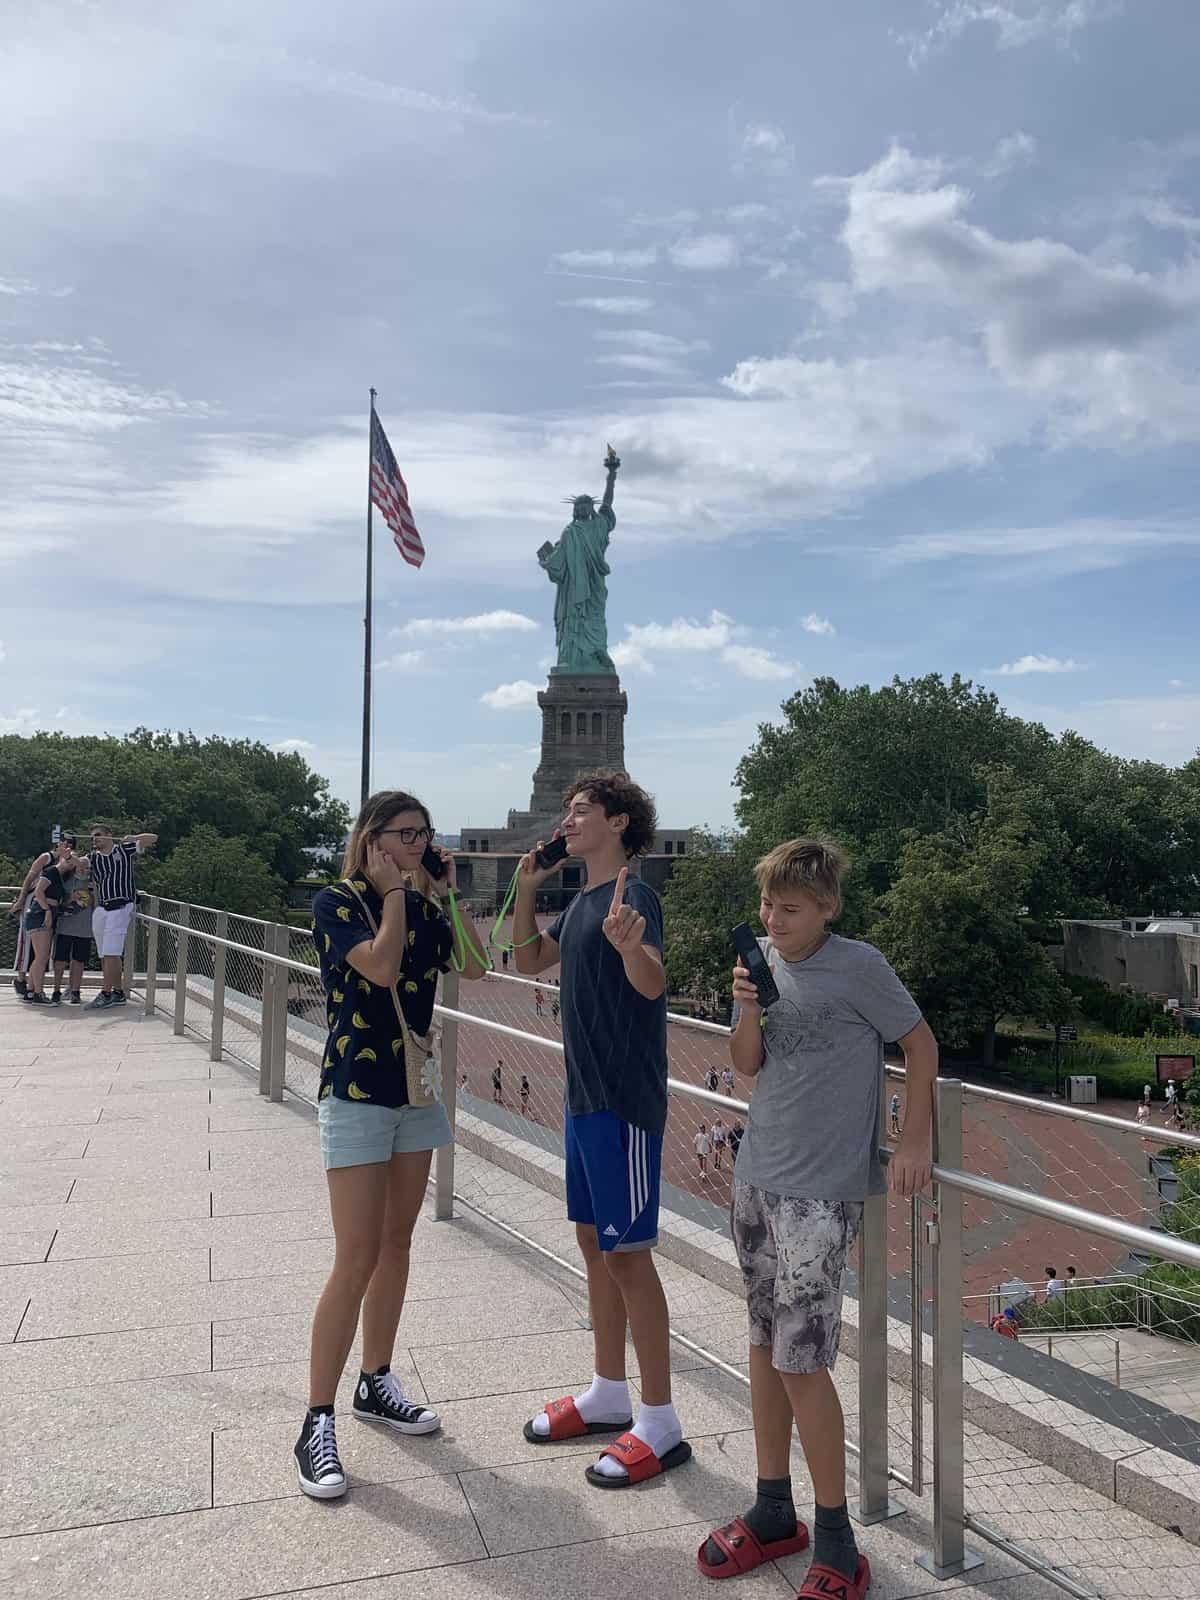 The kids by the statue of liberty with pretend cell phones